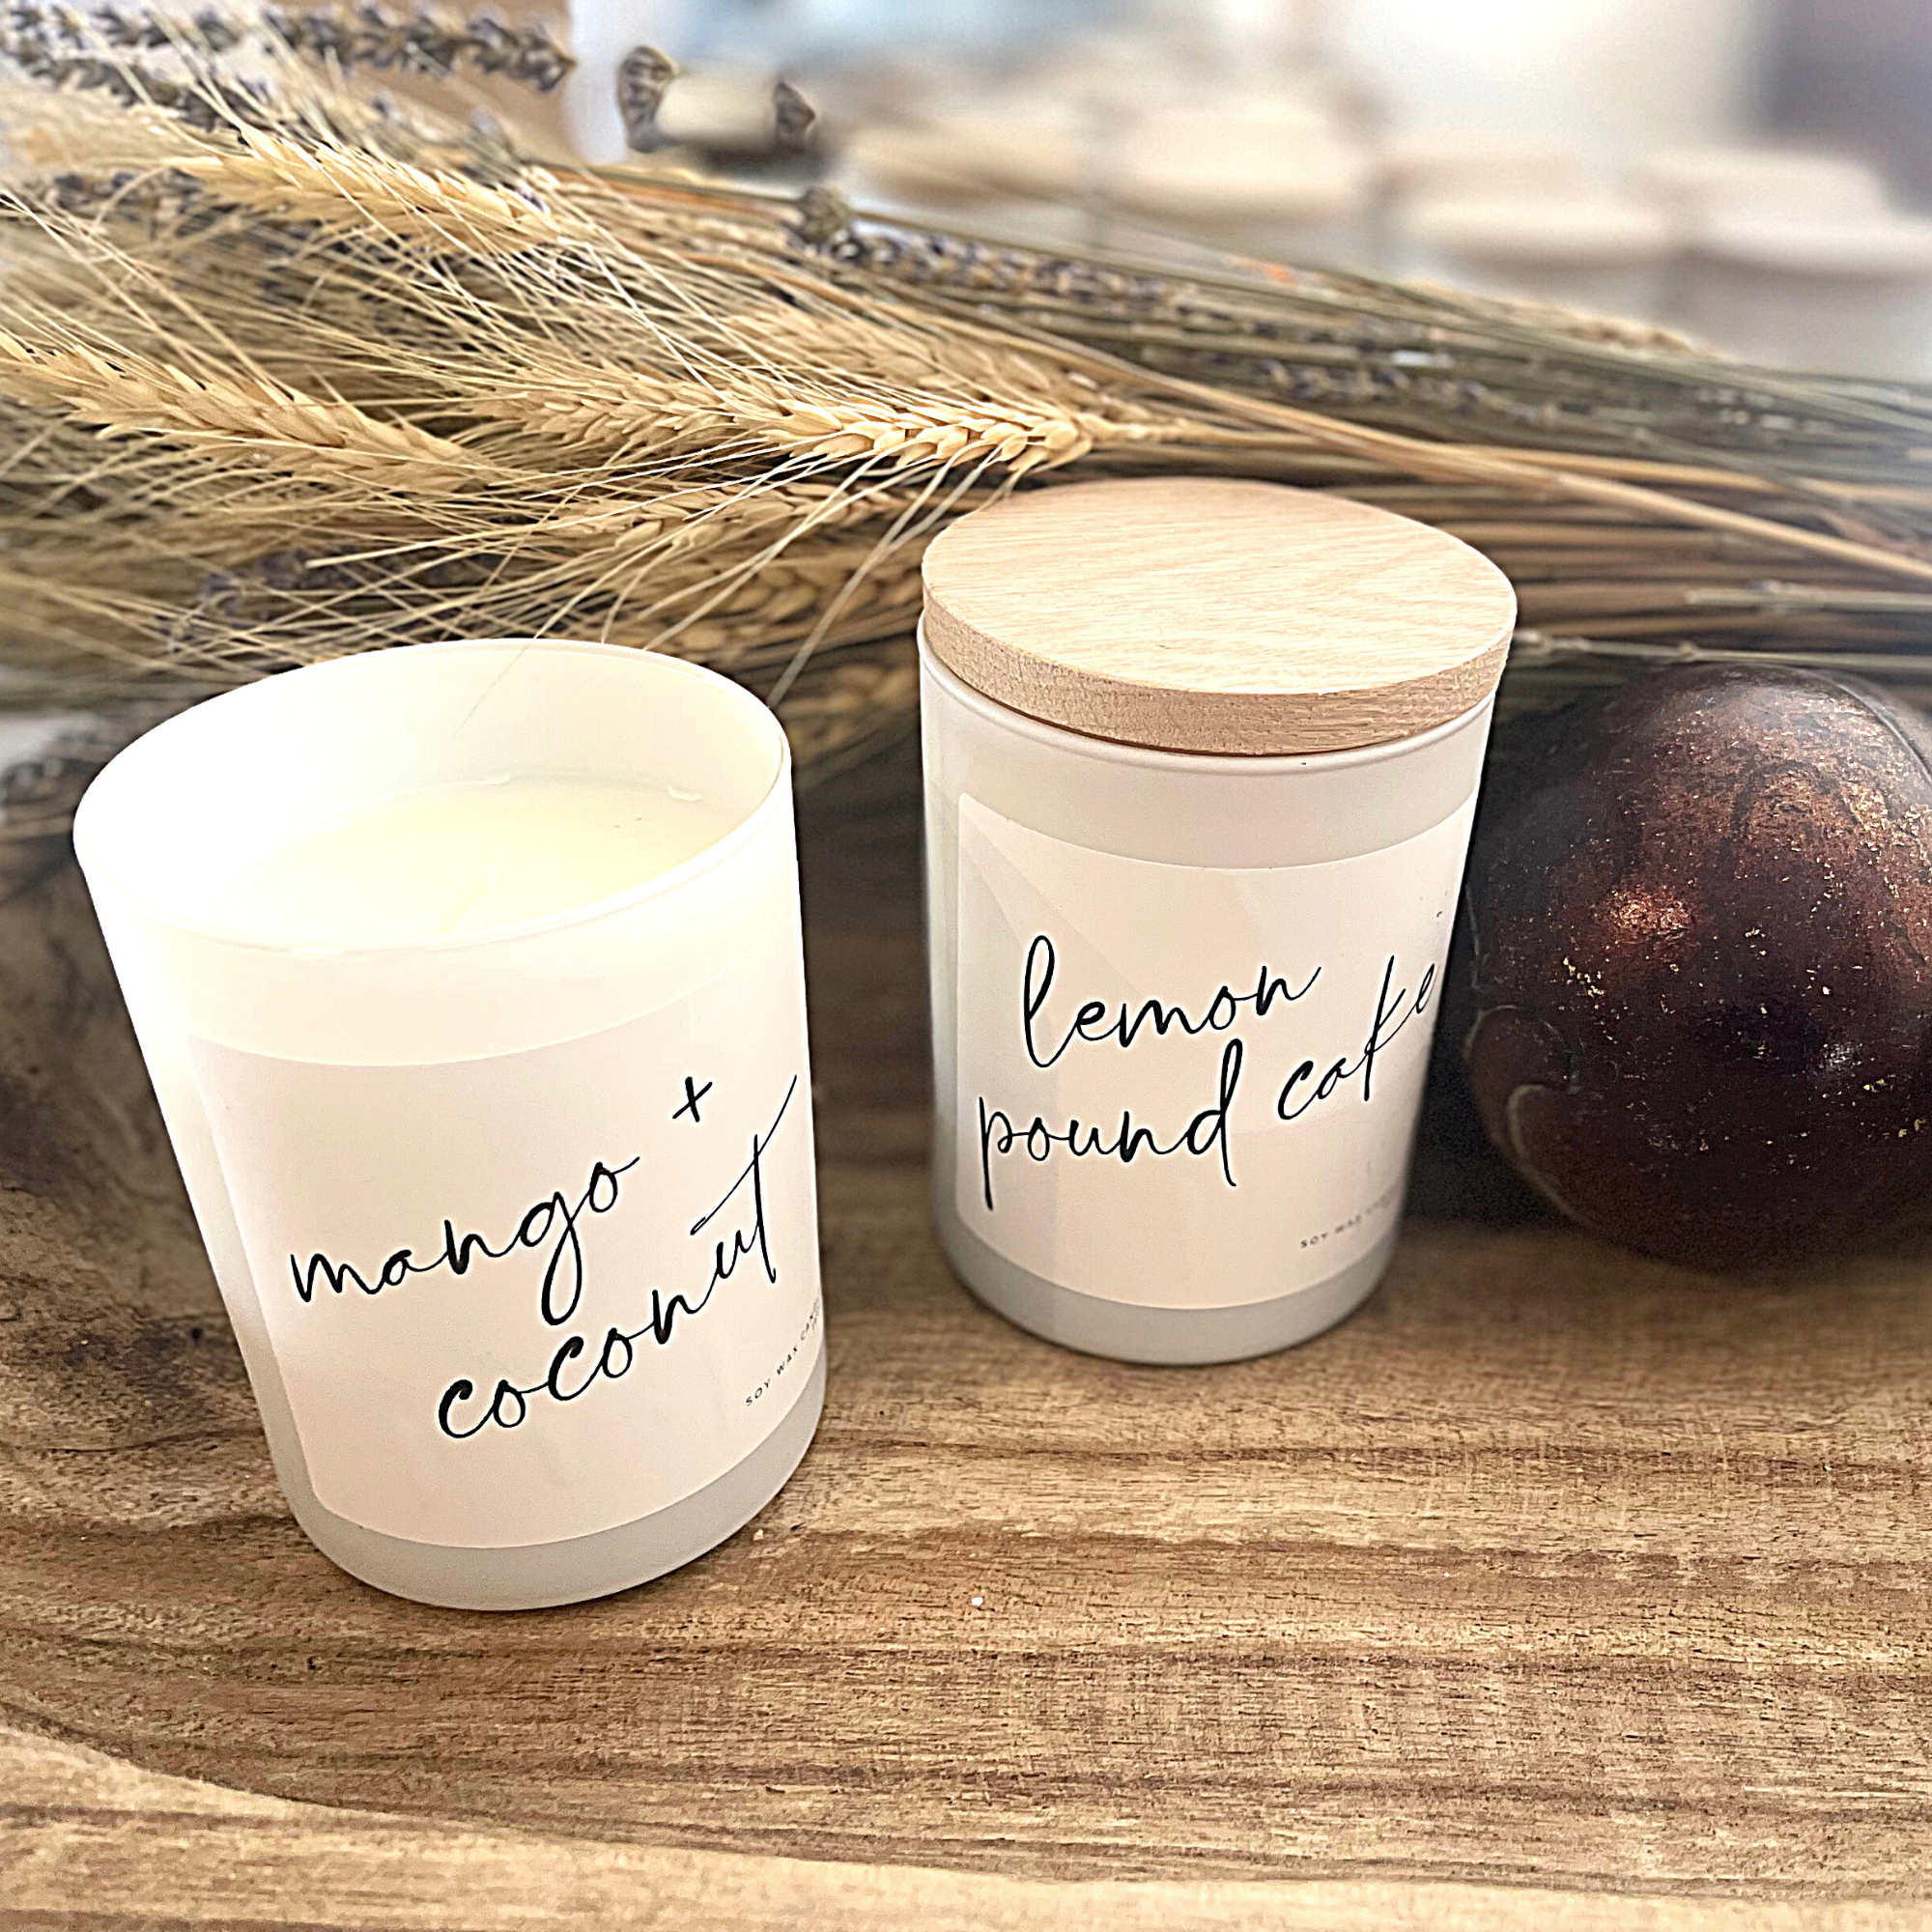 This soy candle is a tropical blend of mango, coconut, and tropical fruit notes. It's like sitting on the beach with your favorite tropical drink. These soy candles are made with 100% soy wax. Soy wax burns clean, is biodegradable, and is known for its great scent throw. mango and coconut candle  yummy scented candle  candle for the home  candle  soy candles